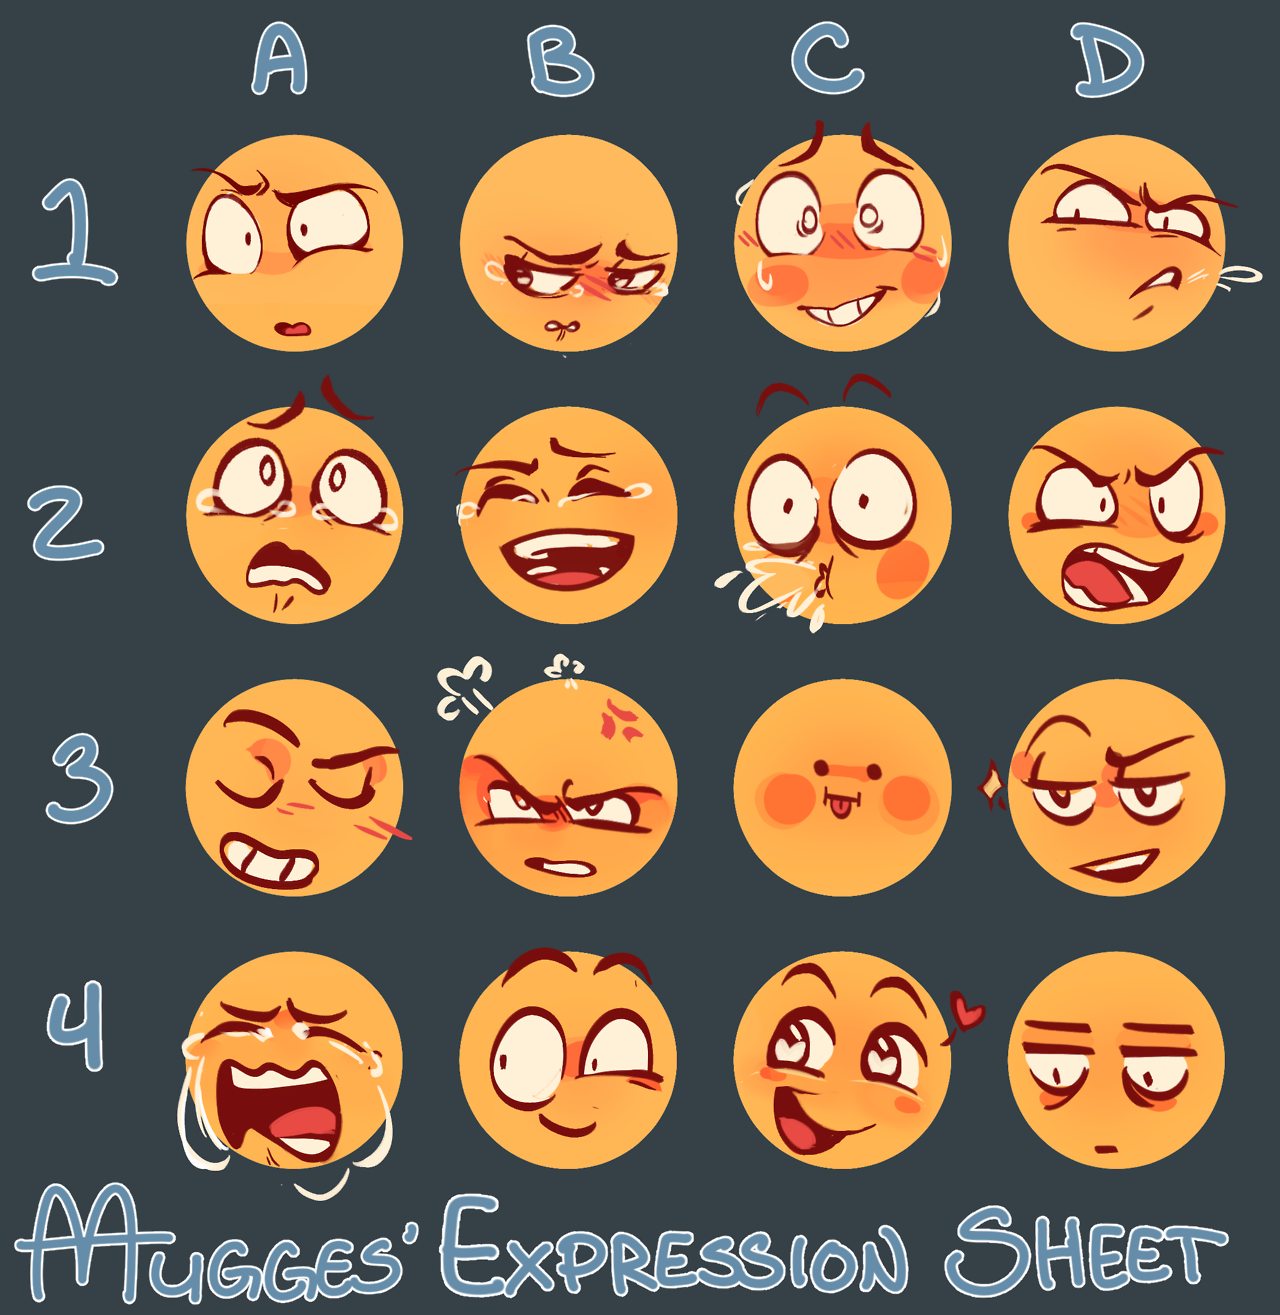 Drawing Expression Challenge (My style deal) by Hrystina on DeviantArt.